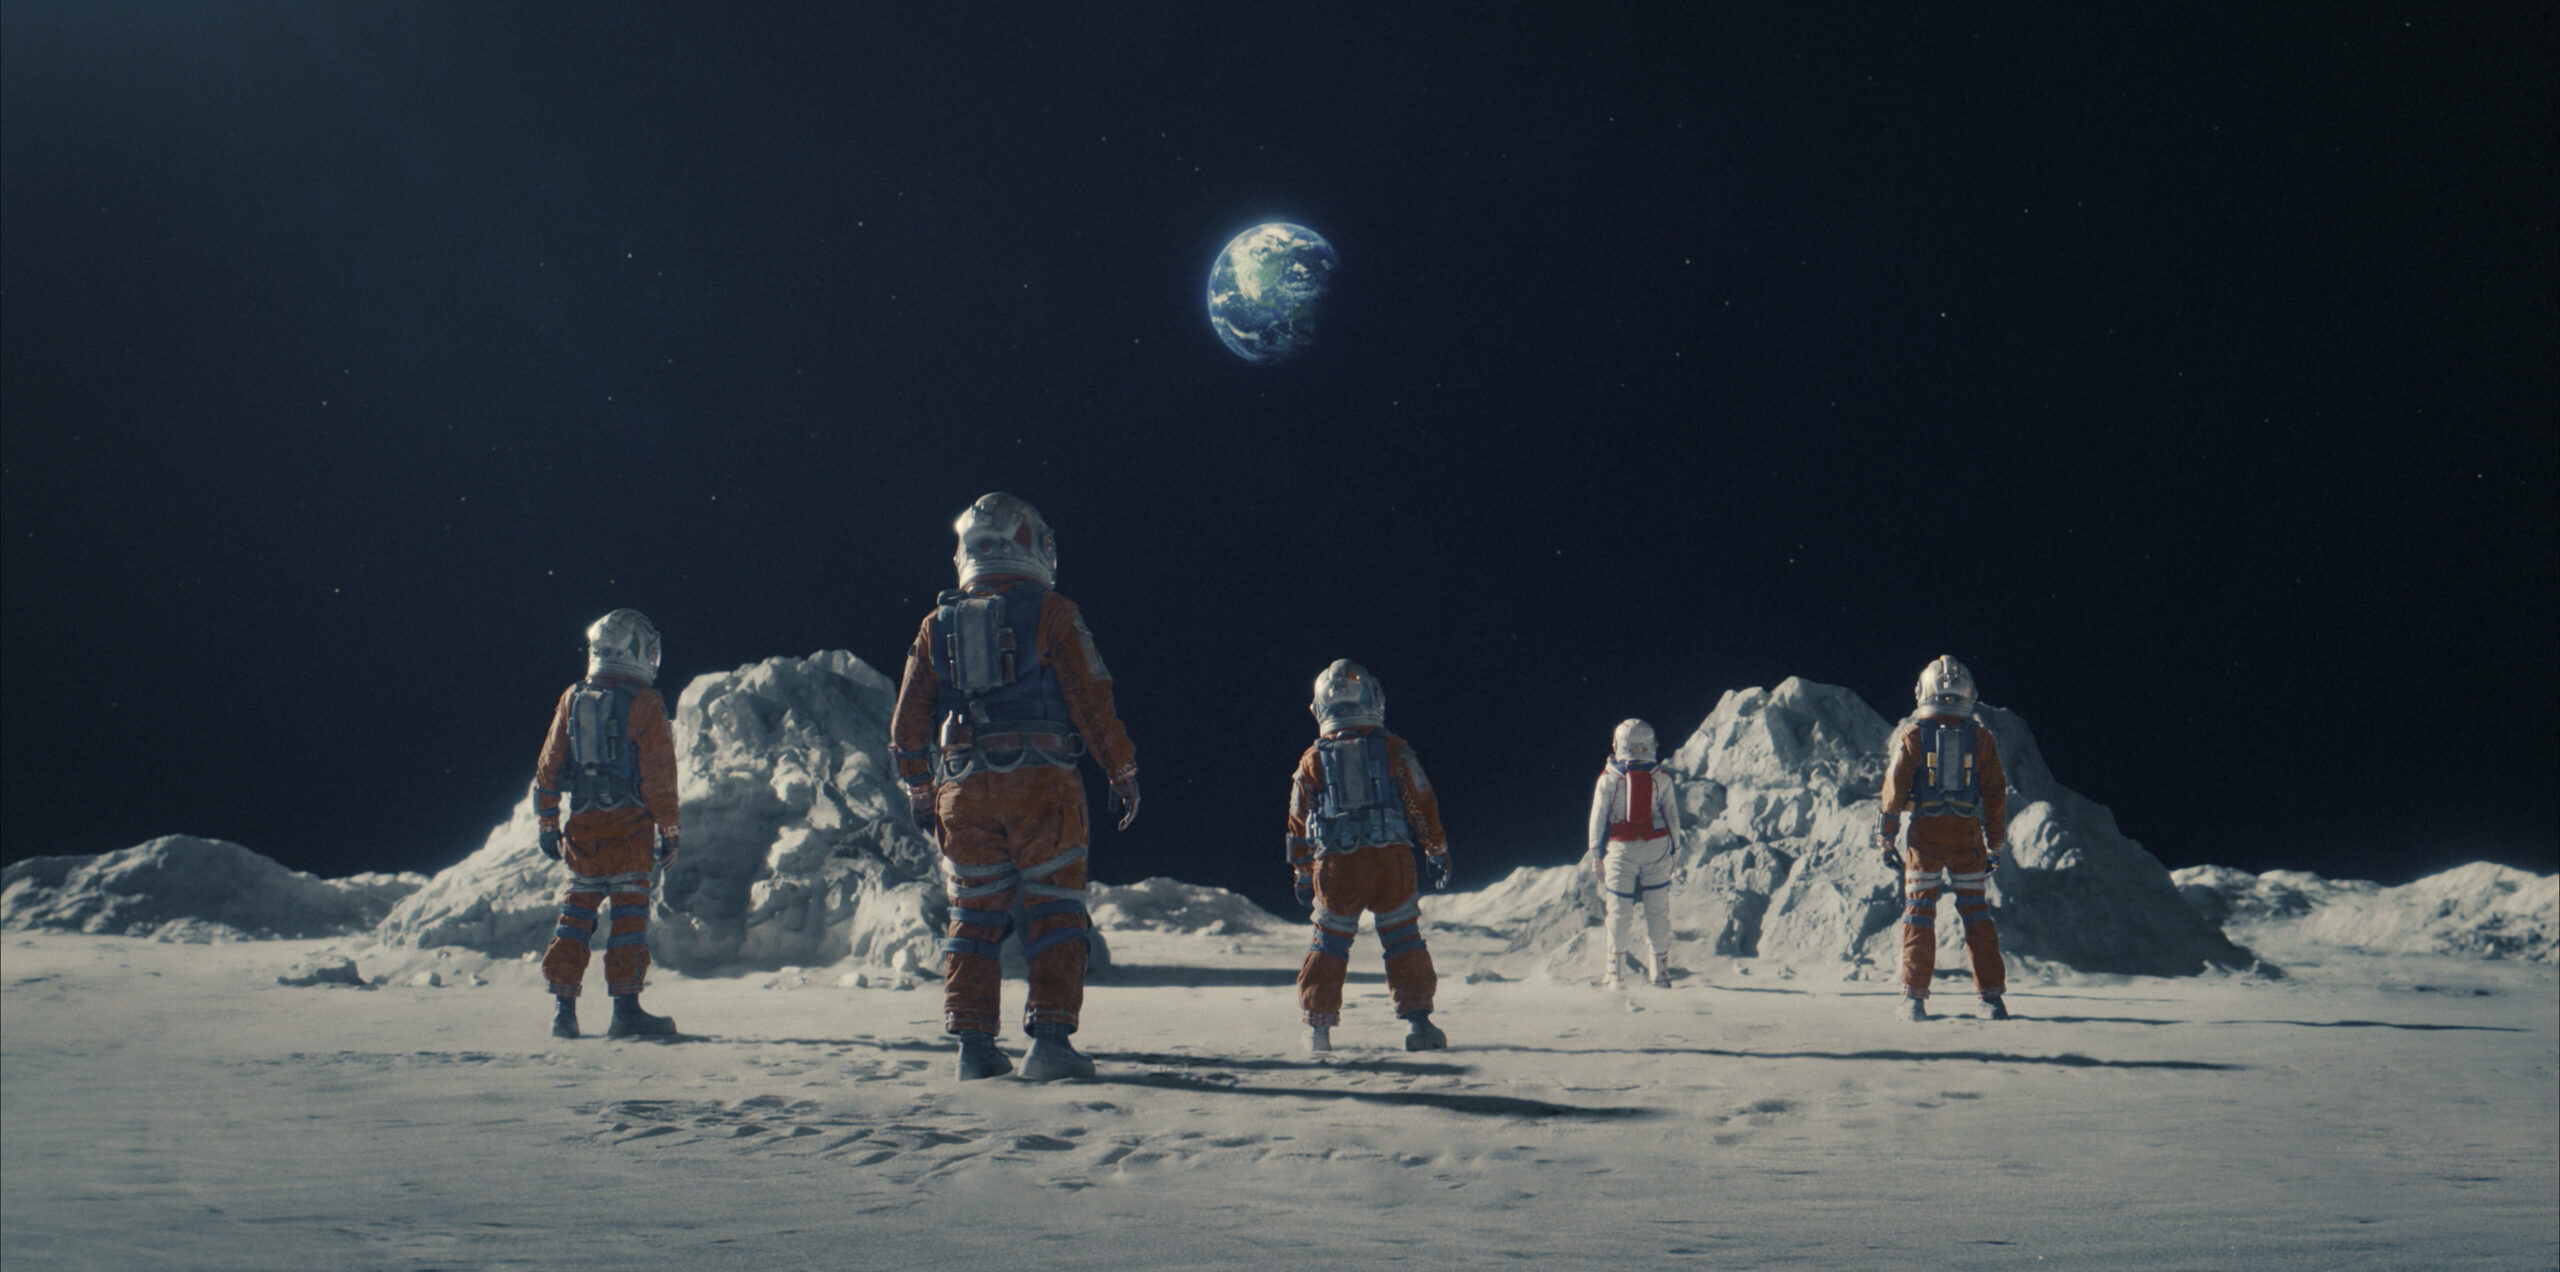 Kids on moon staring at Earth